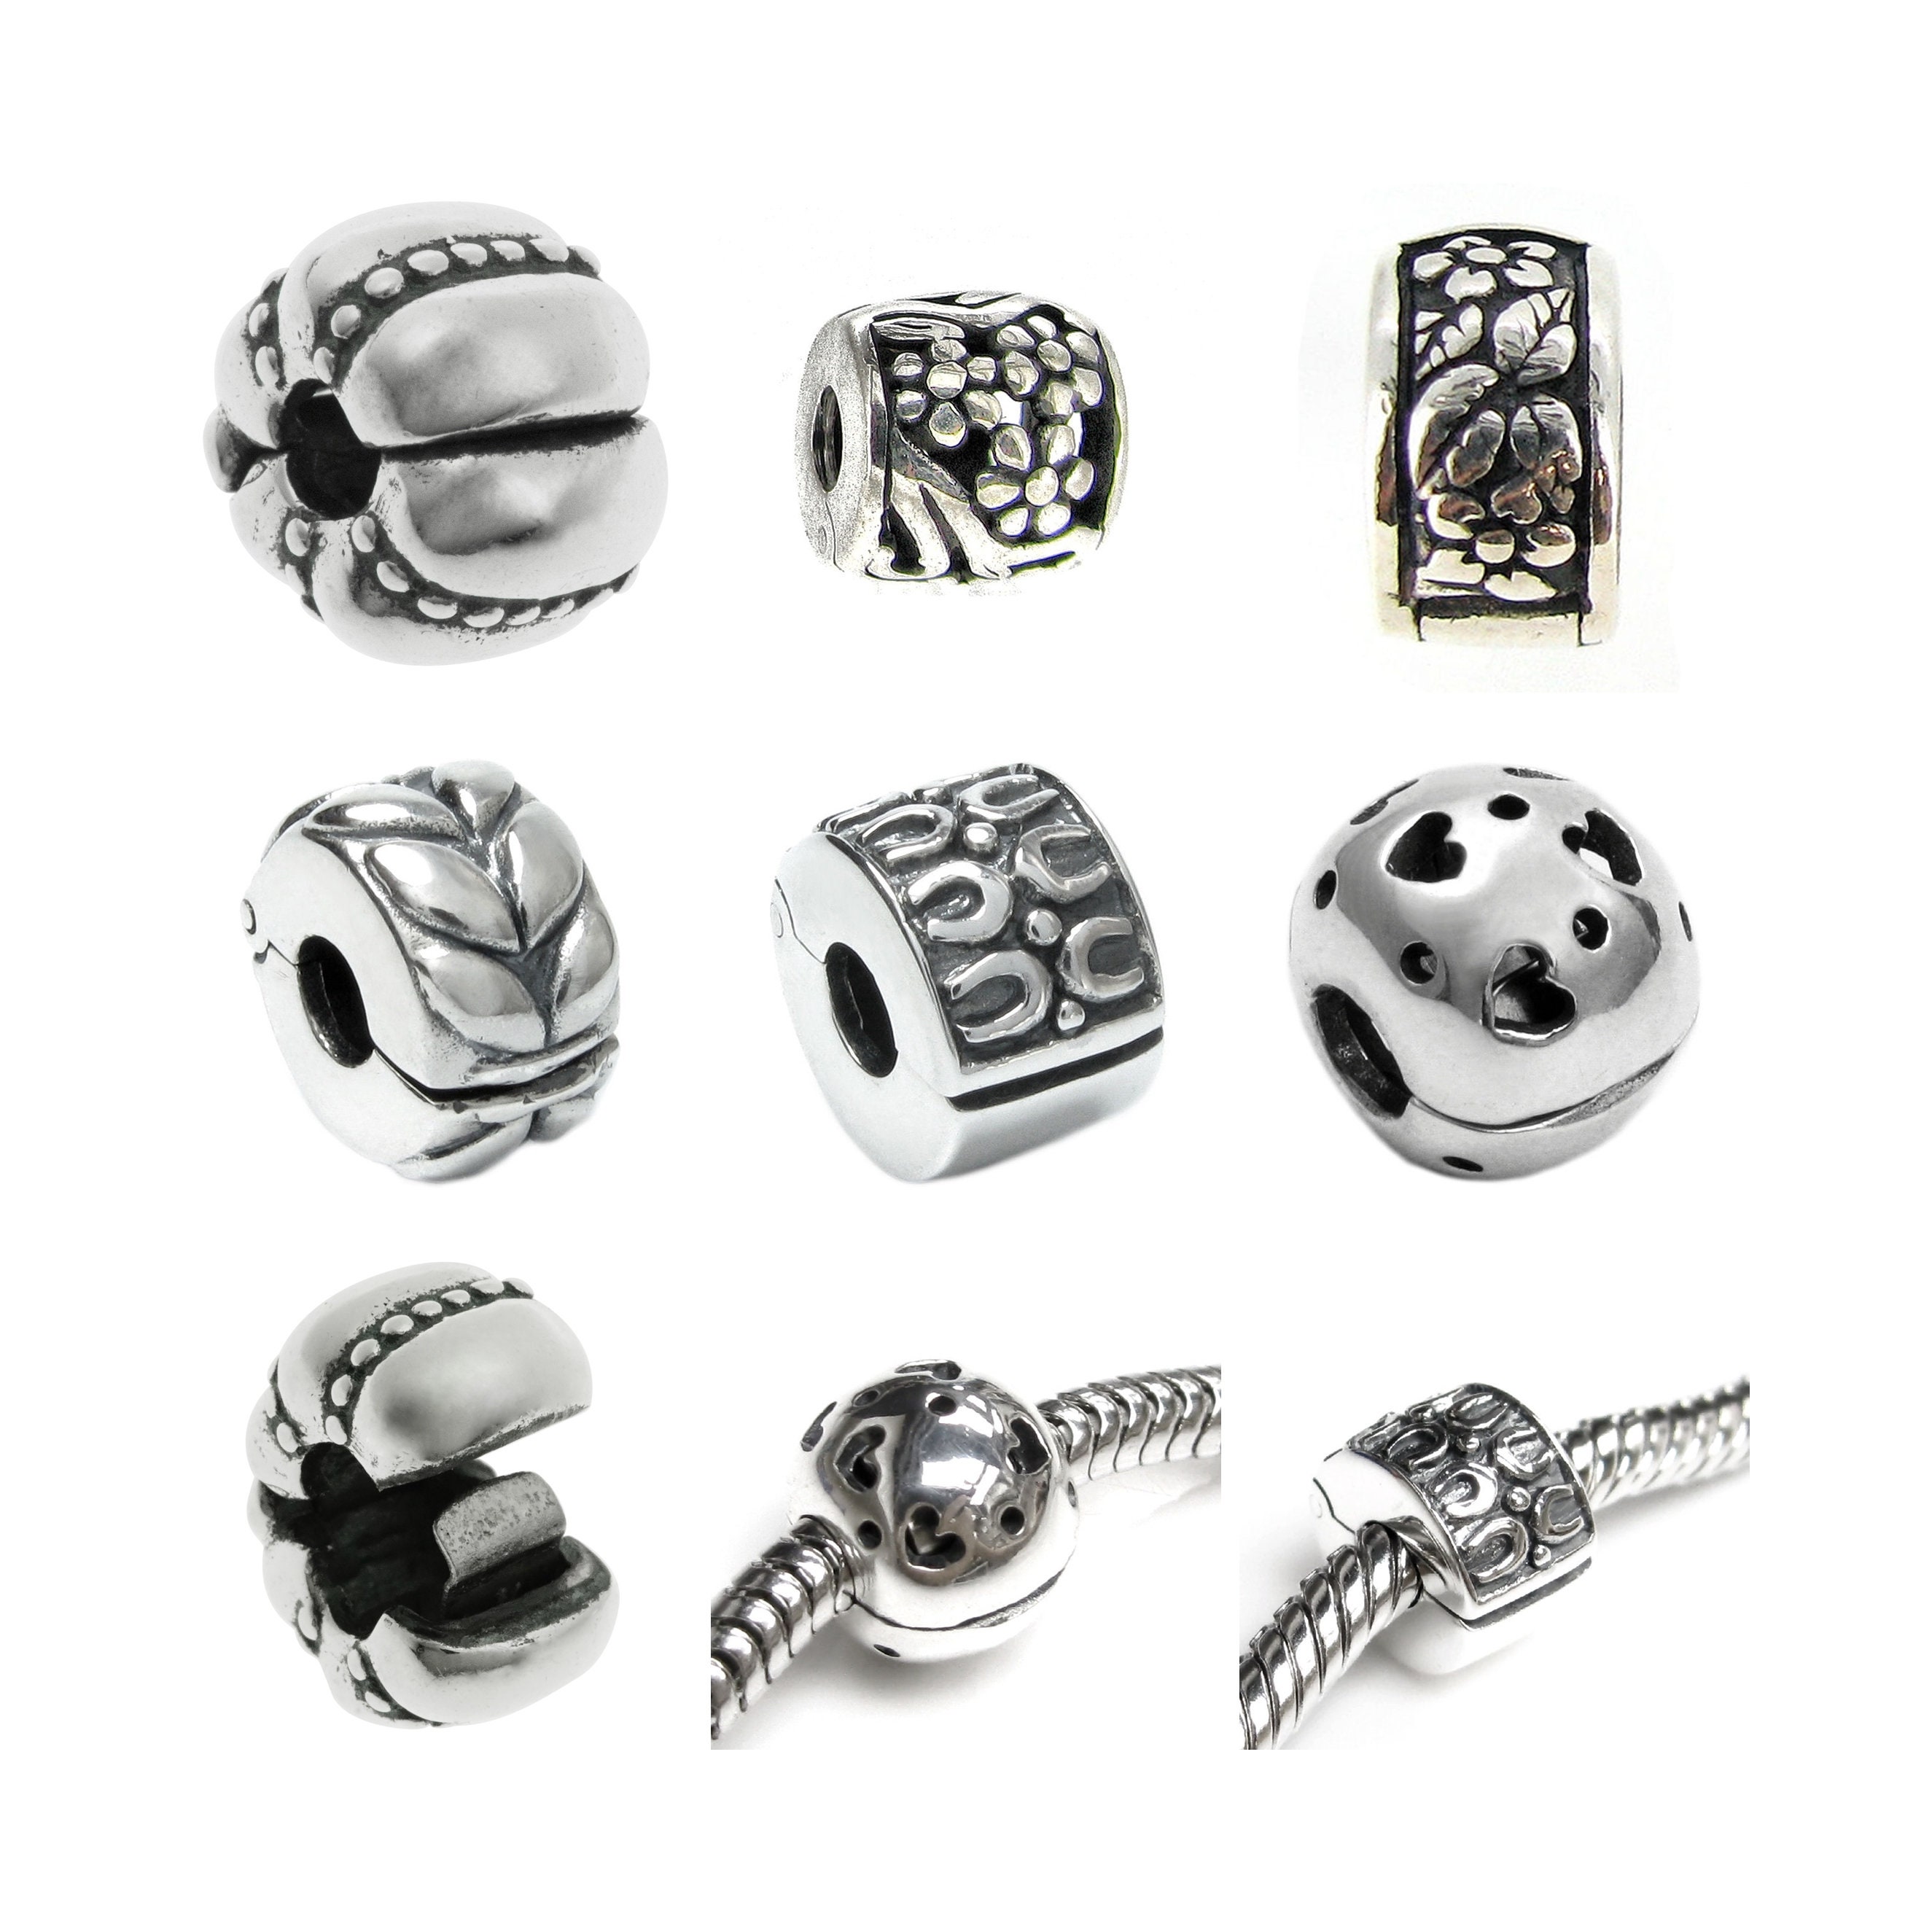 JEWELRIESHOP Clip Spacer Charm for Bracelet Clip Lock Stopper Bead Spacer  European Openable Beads 2pcs